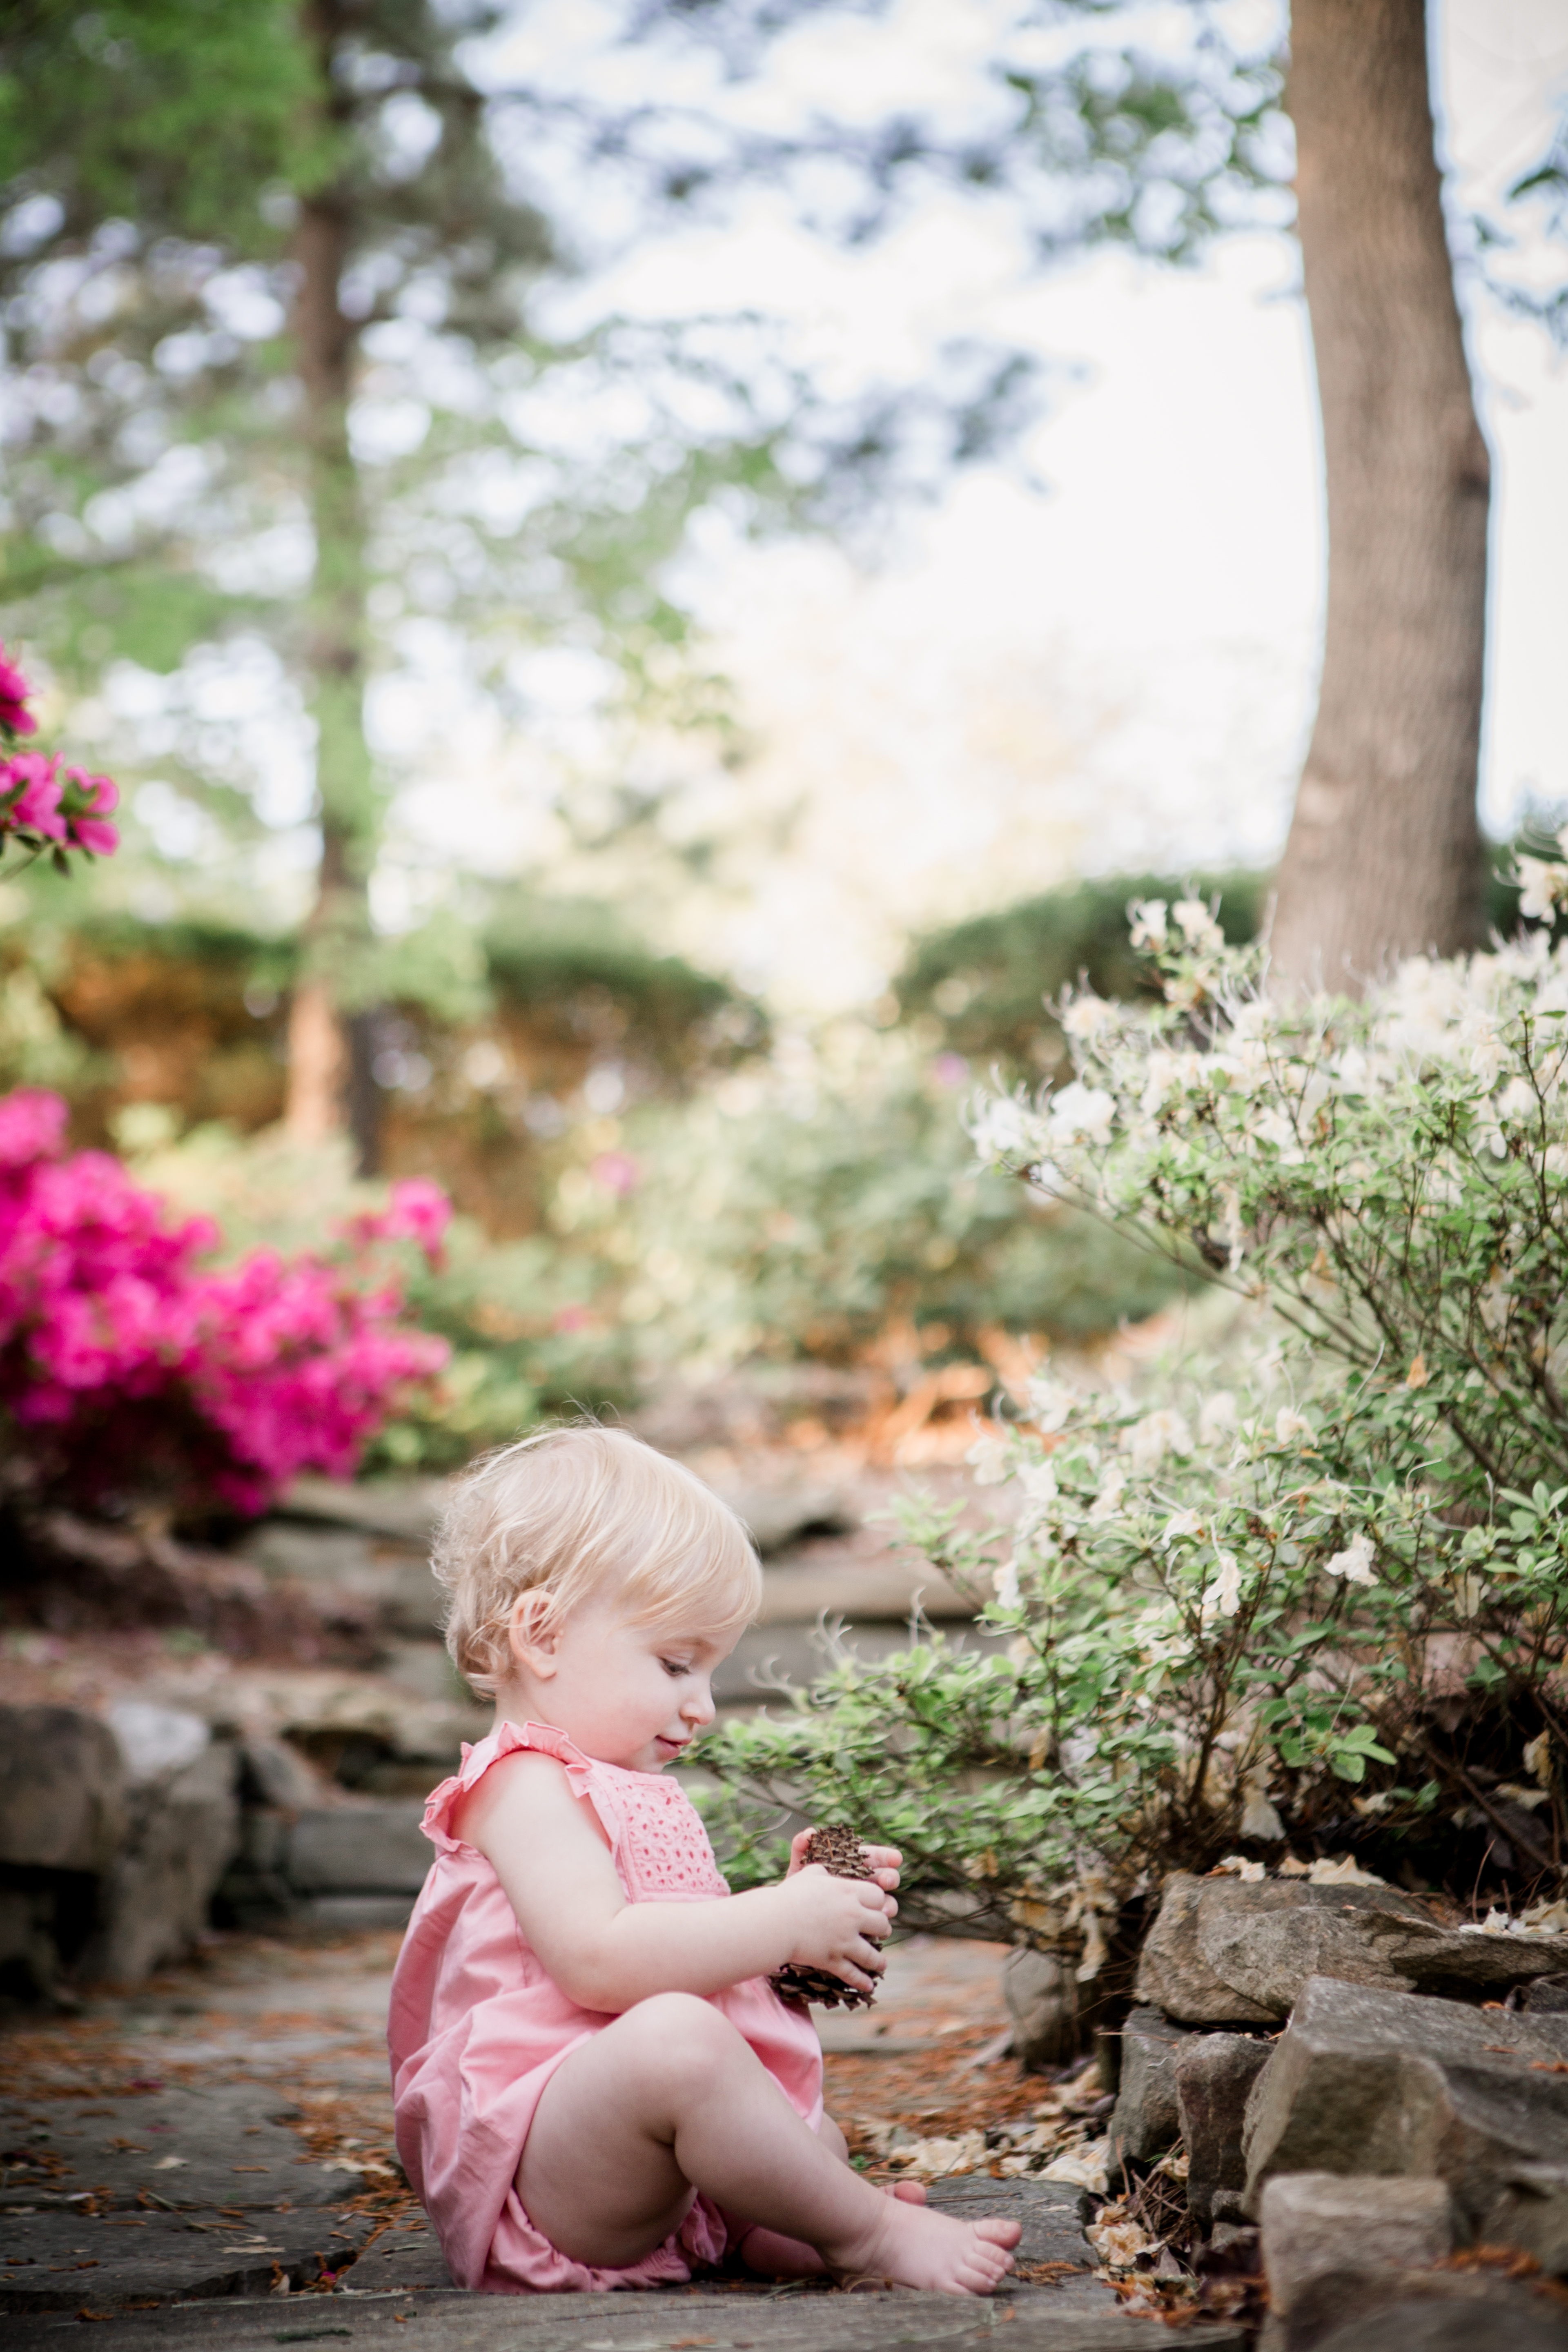 Playing with a rock by Knoxville Wedding Photographer, Amanda May Photos.